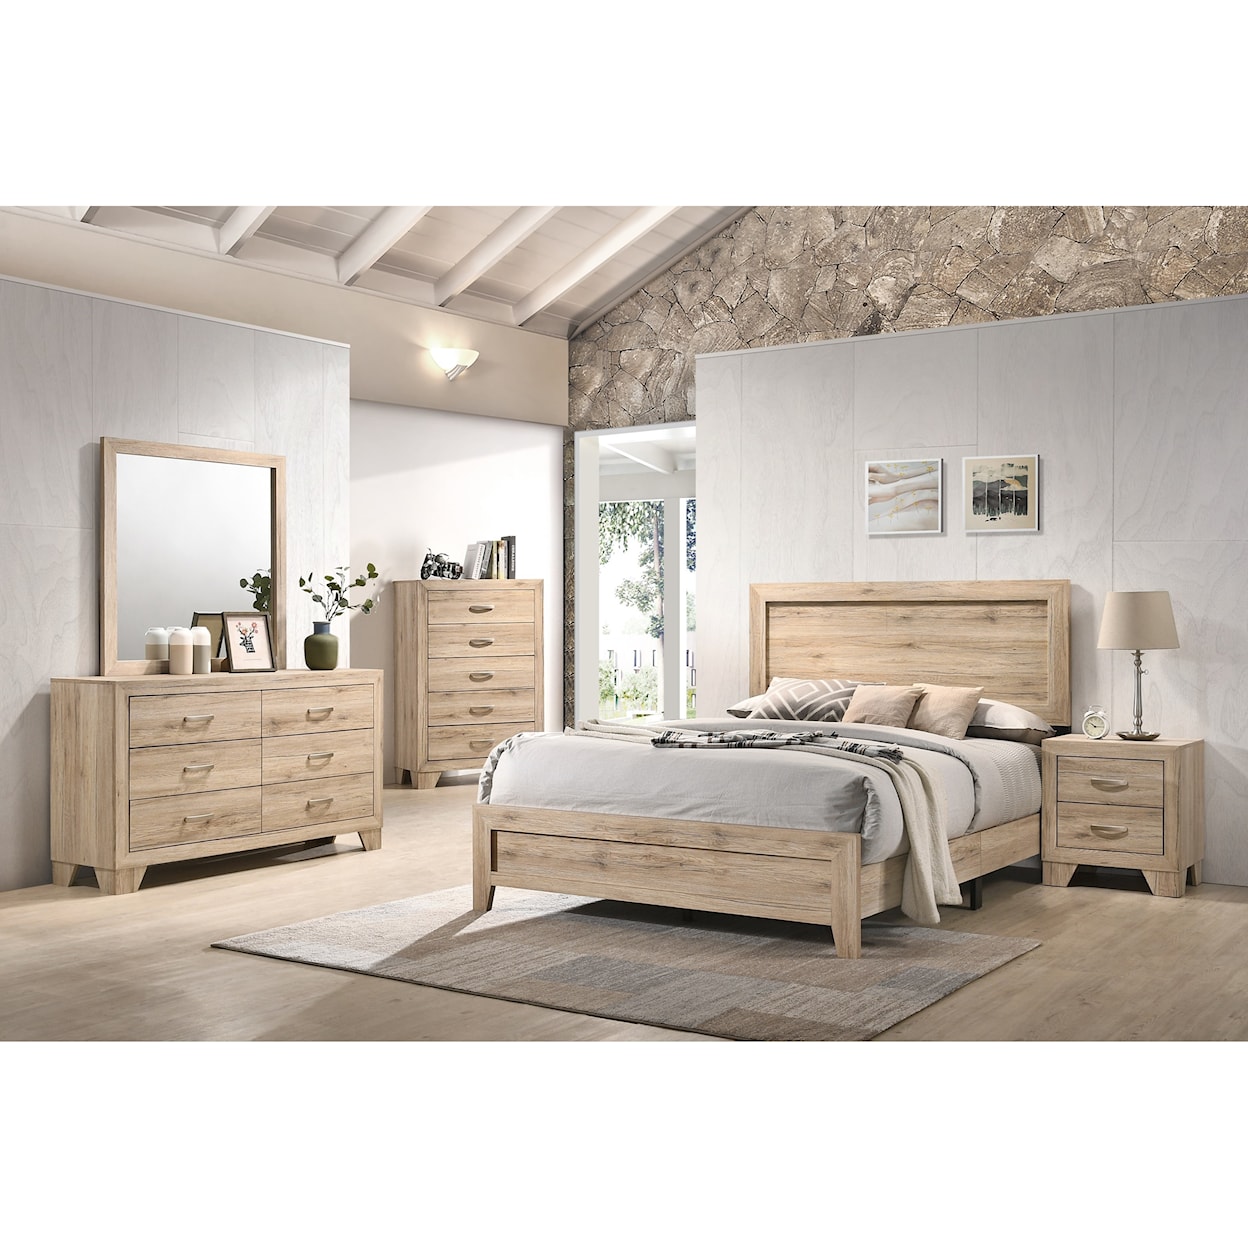 Acme Furniture Miquell Queen Bedroom Group